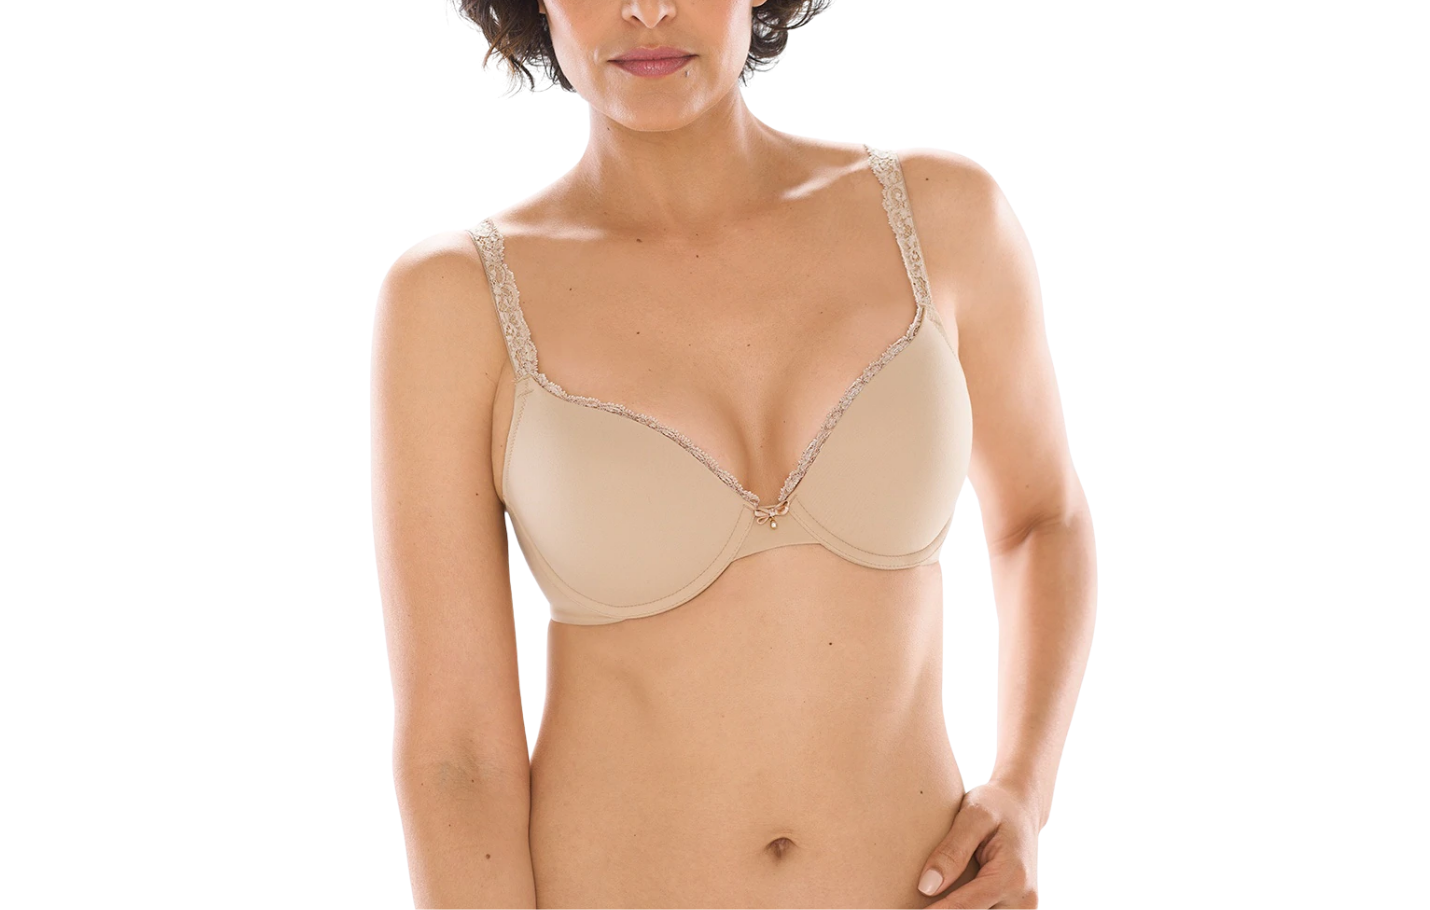 Lace Bras for Women, Push Up Pocket Bra, Can Be Put in Silicon Inserts, 4  Rows, Bottons, Mastectomy, Breast Cancer Female